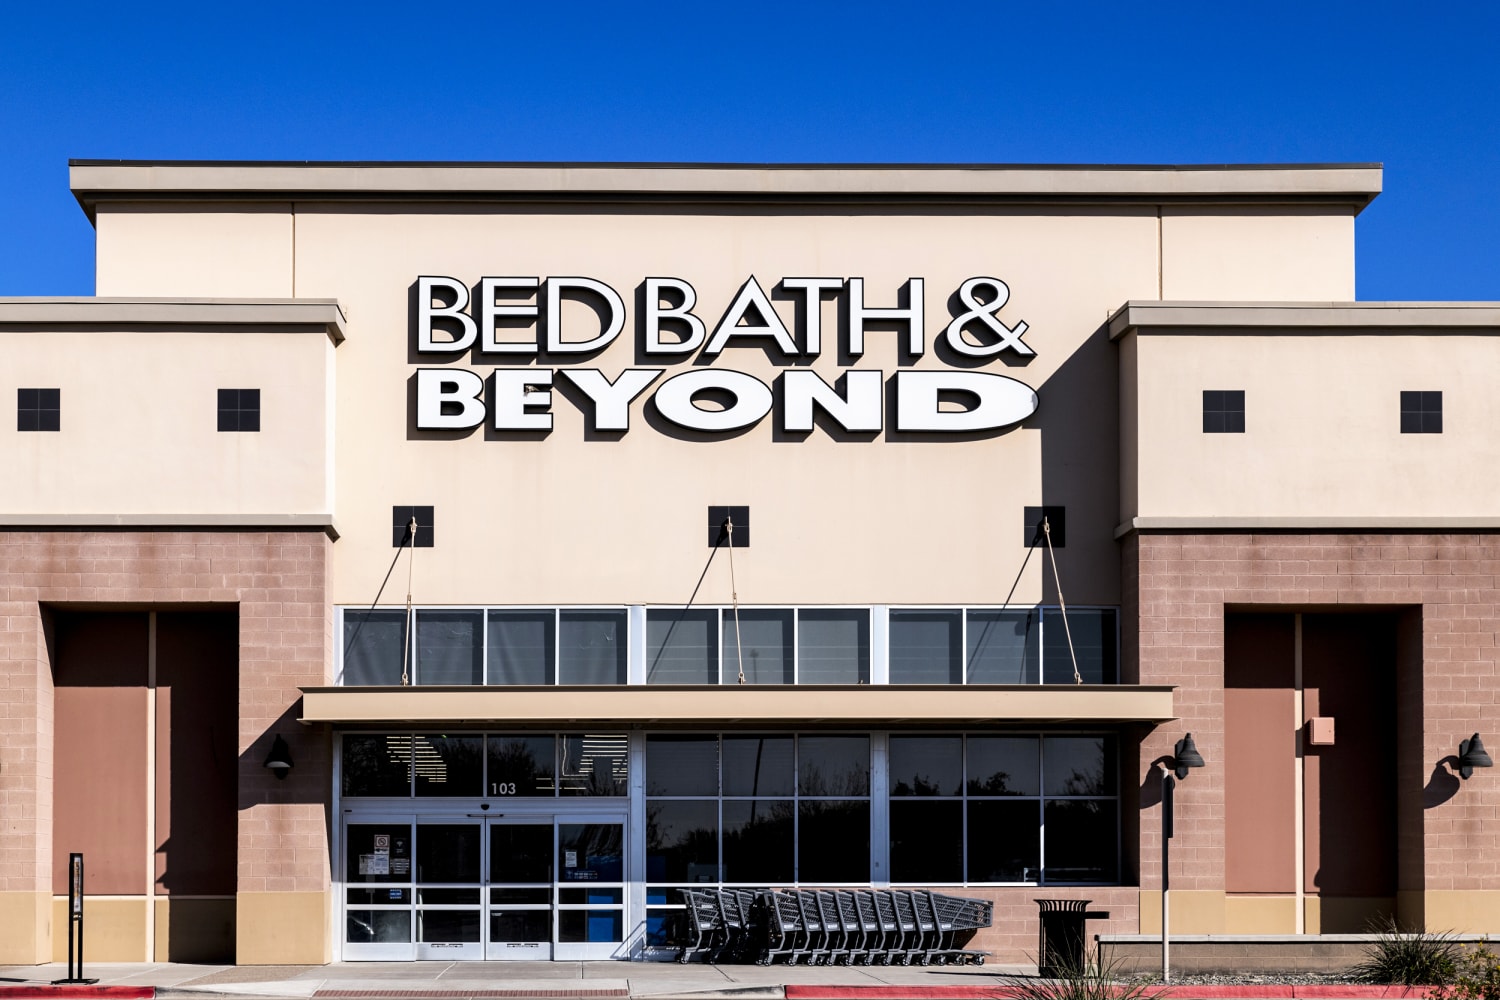 Bed, Bath & Beyond's $375 mln loan is temporary relief ahead of